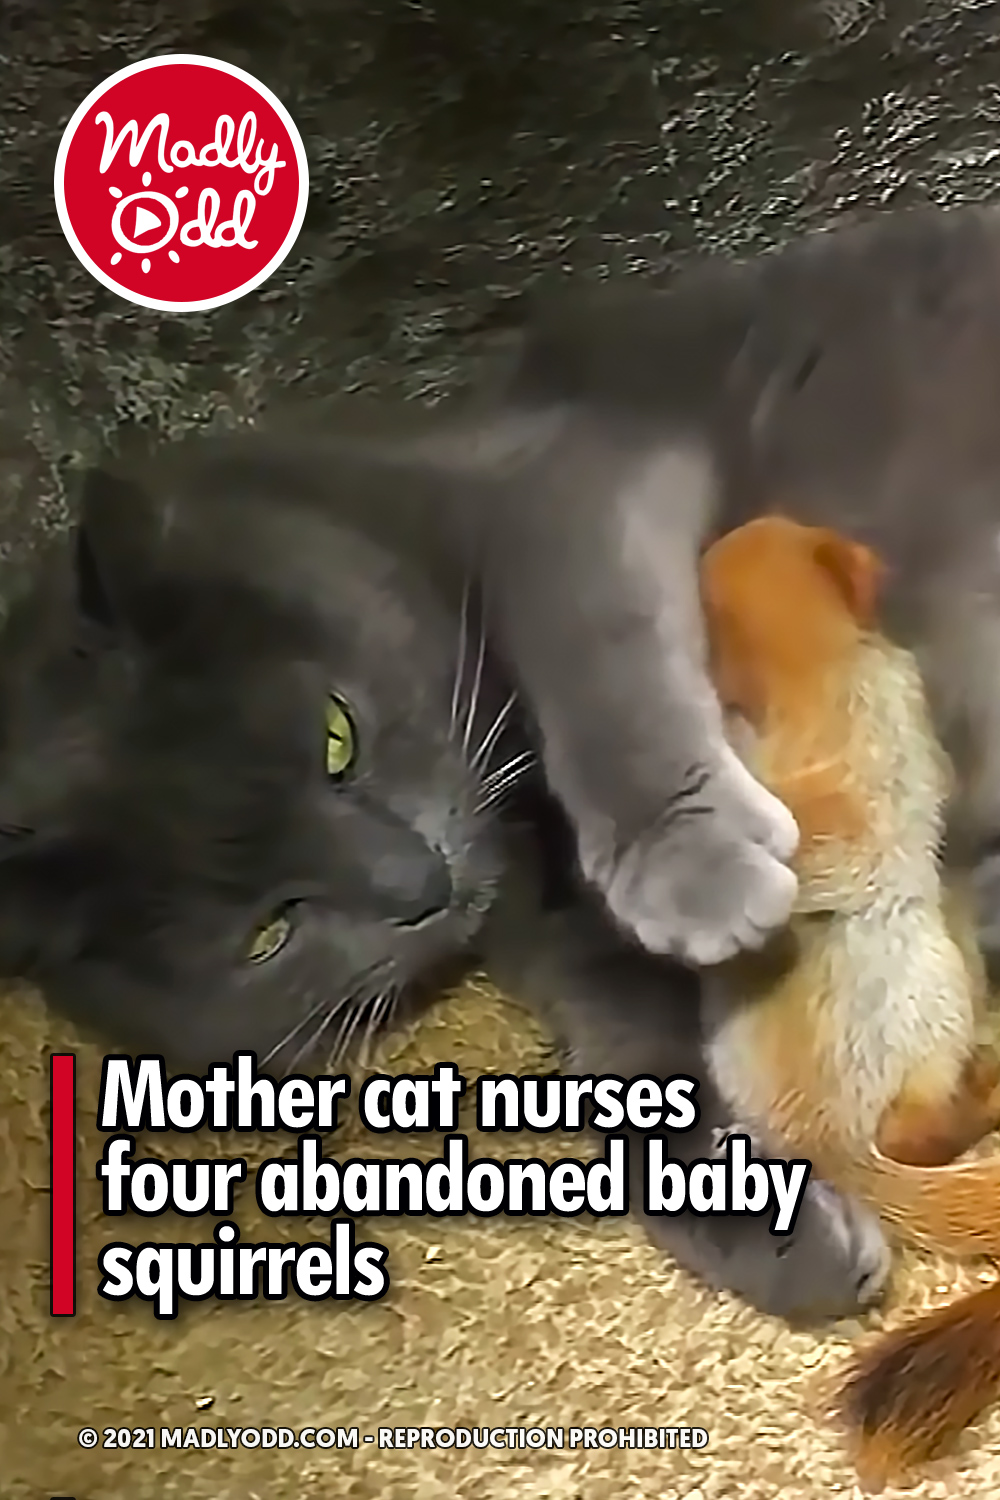 Mother cat nurses four abandoned baby squirrels